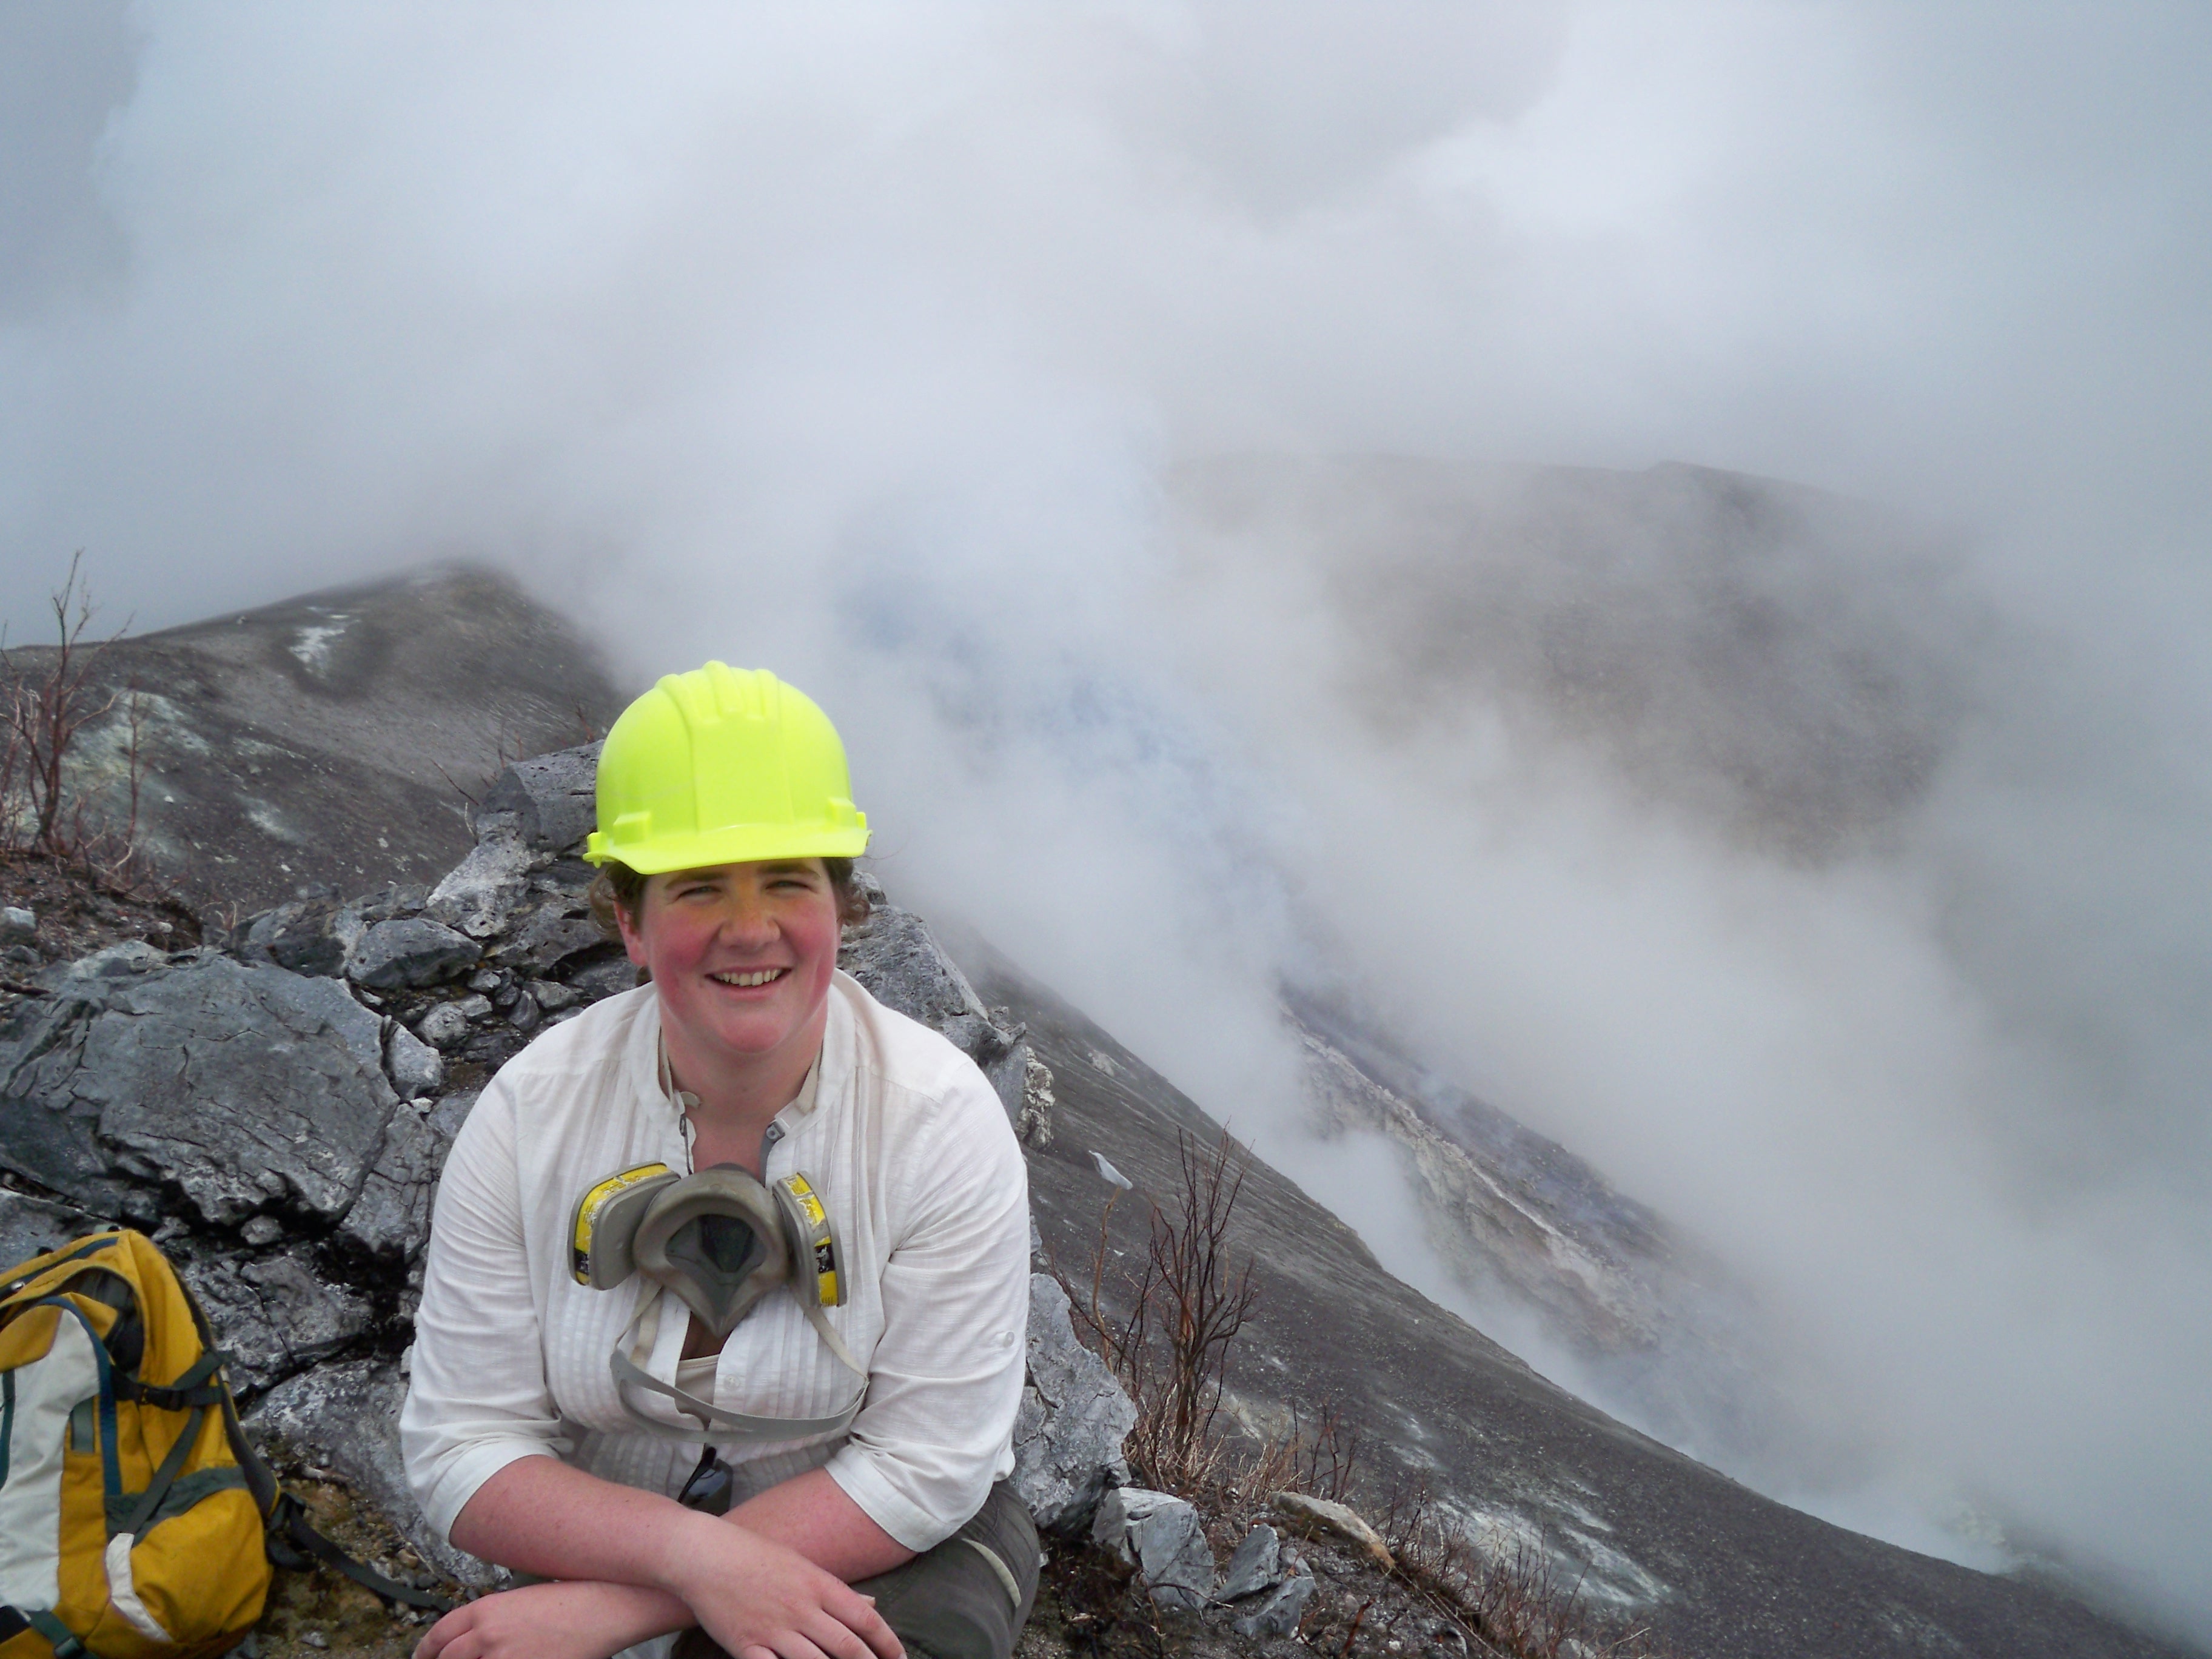 Woman wearing a white shirt and yellow hard hat sits near a volcano vent on the Turrialba volcano